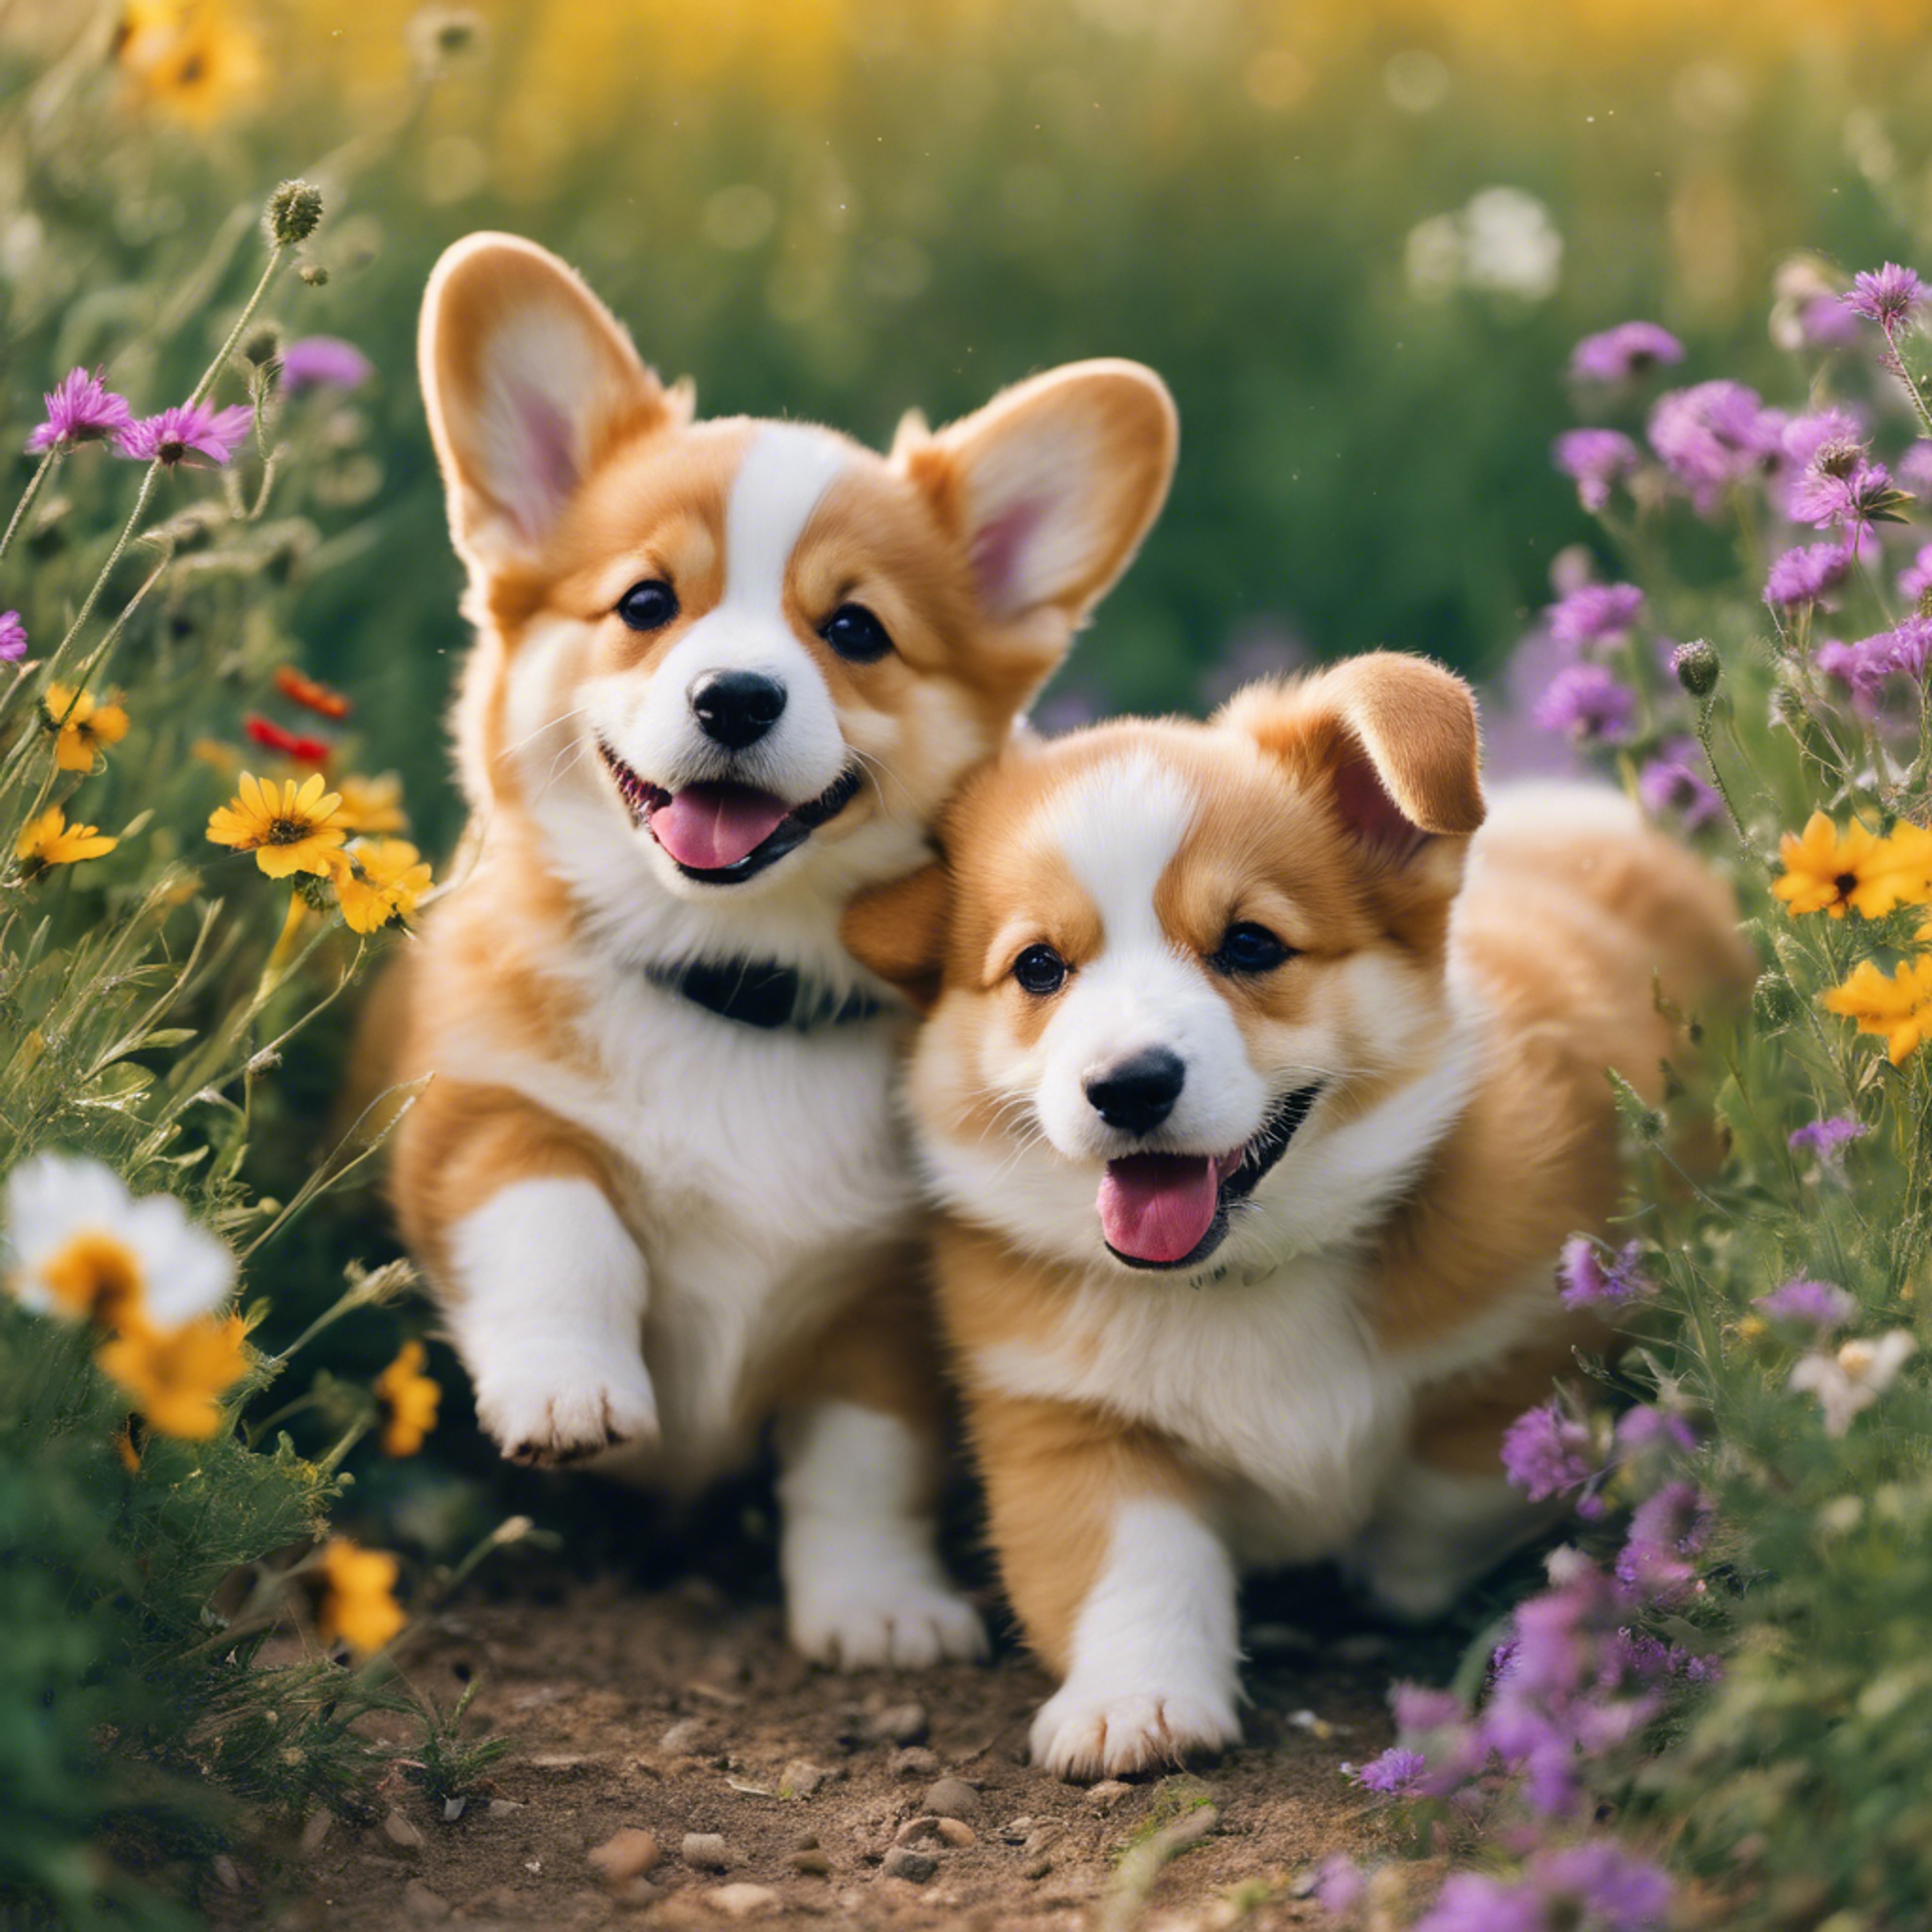 Corgi puppies frolic in a meadow filled with colourful wildflowers. Валлпапер[ff39099a16654d489ef7]